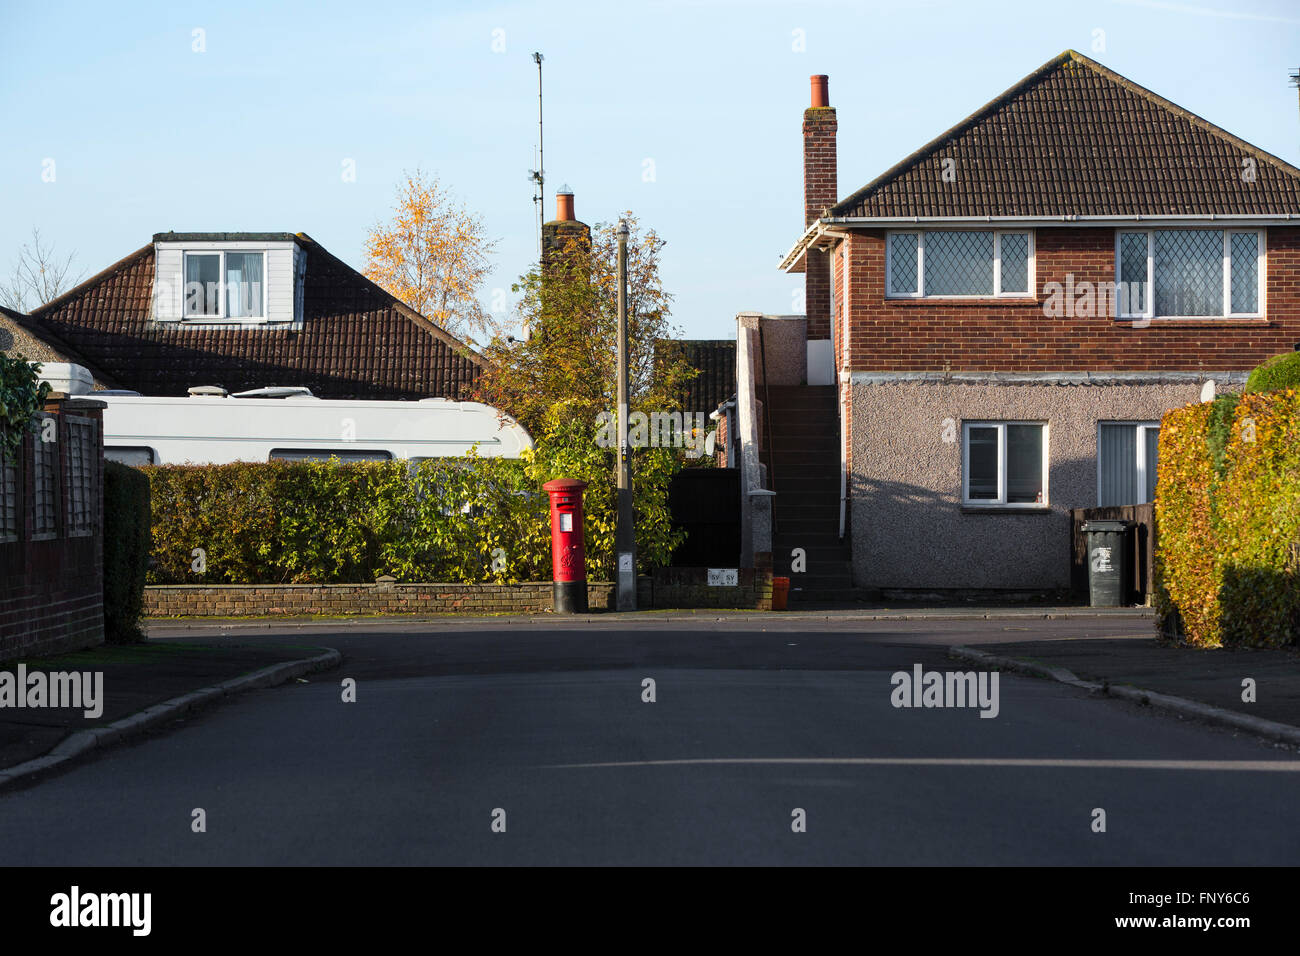 Street scene with hedge and red post box in Swindon, UK. Stock Photo